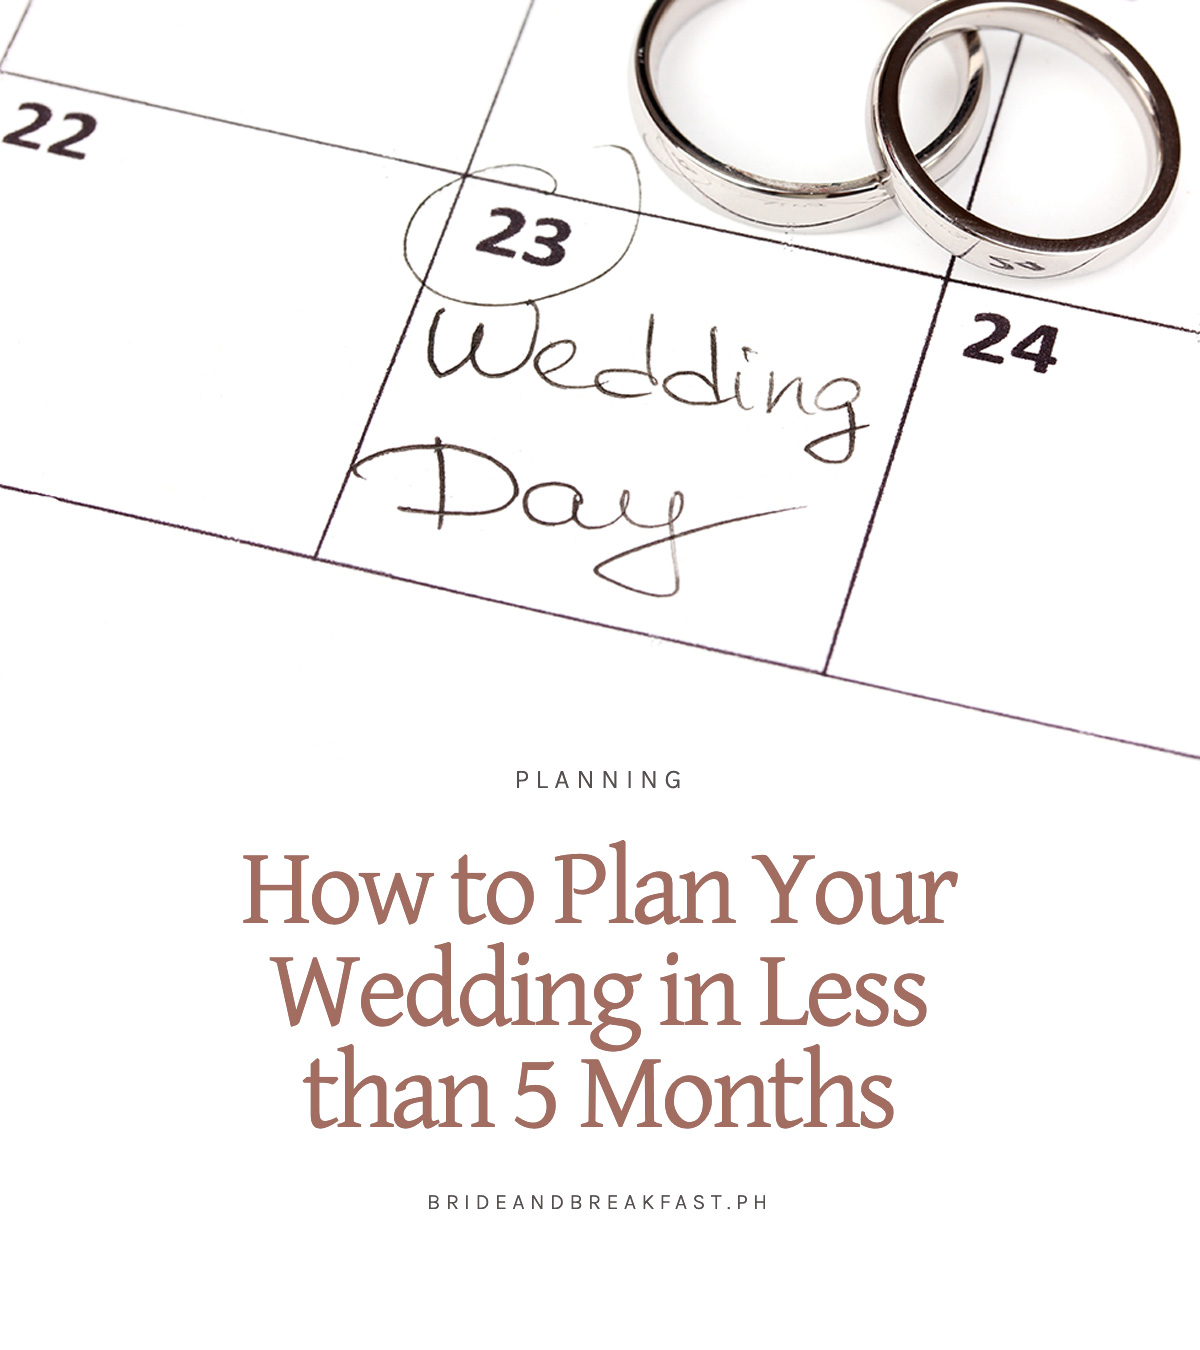 How to Plan Your Wedding in Less than 5 Months